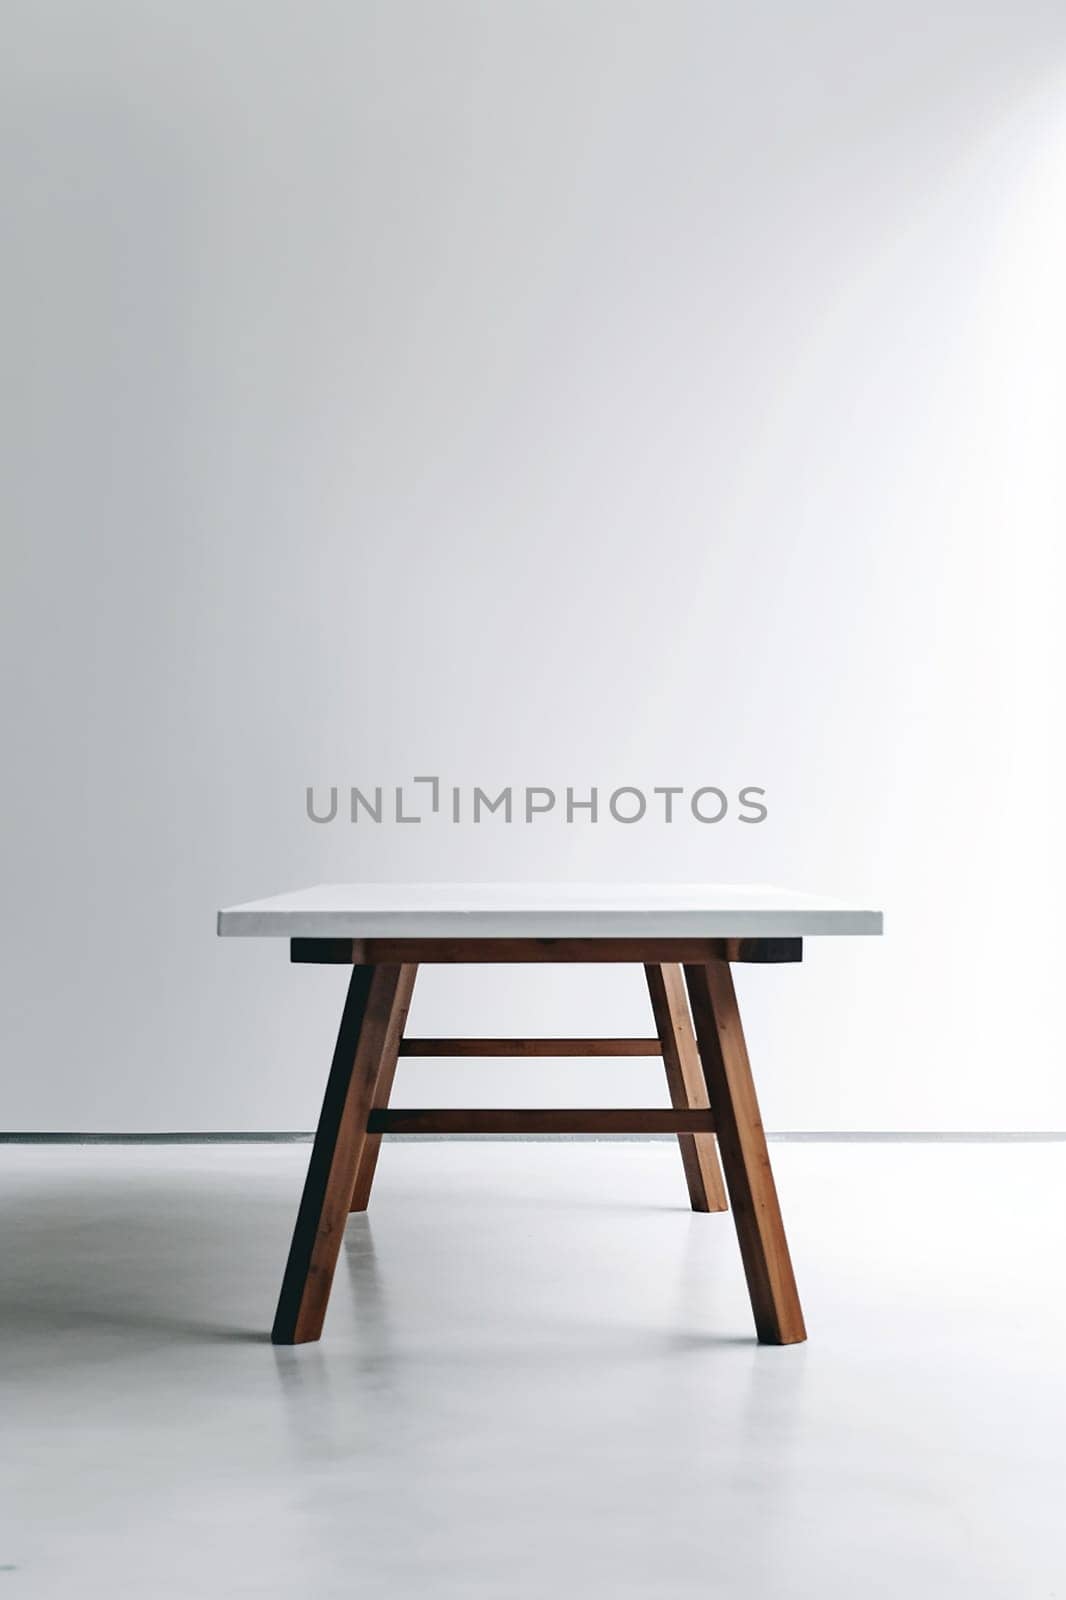 A minimalistic white table with wooden legs in a bright room.